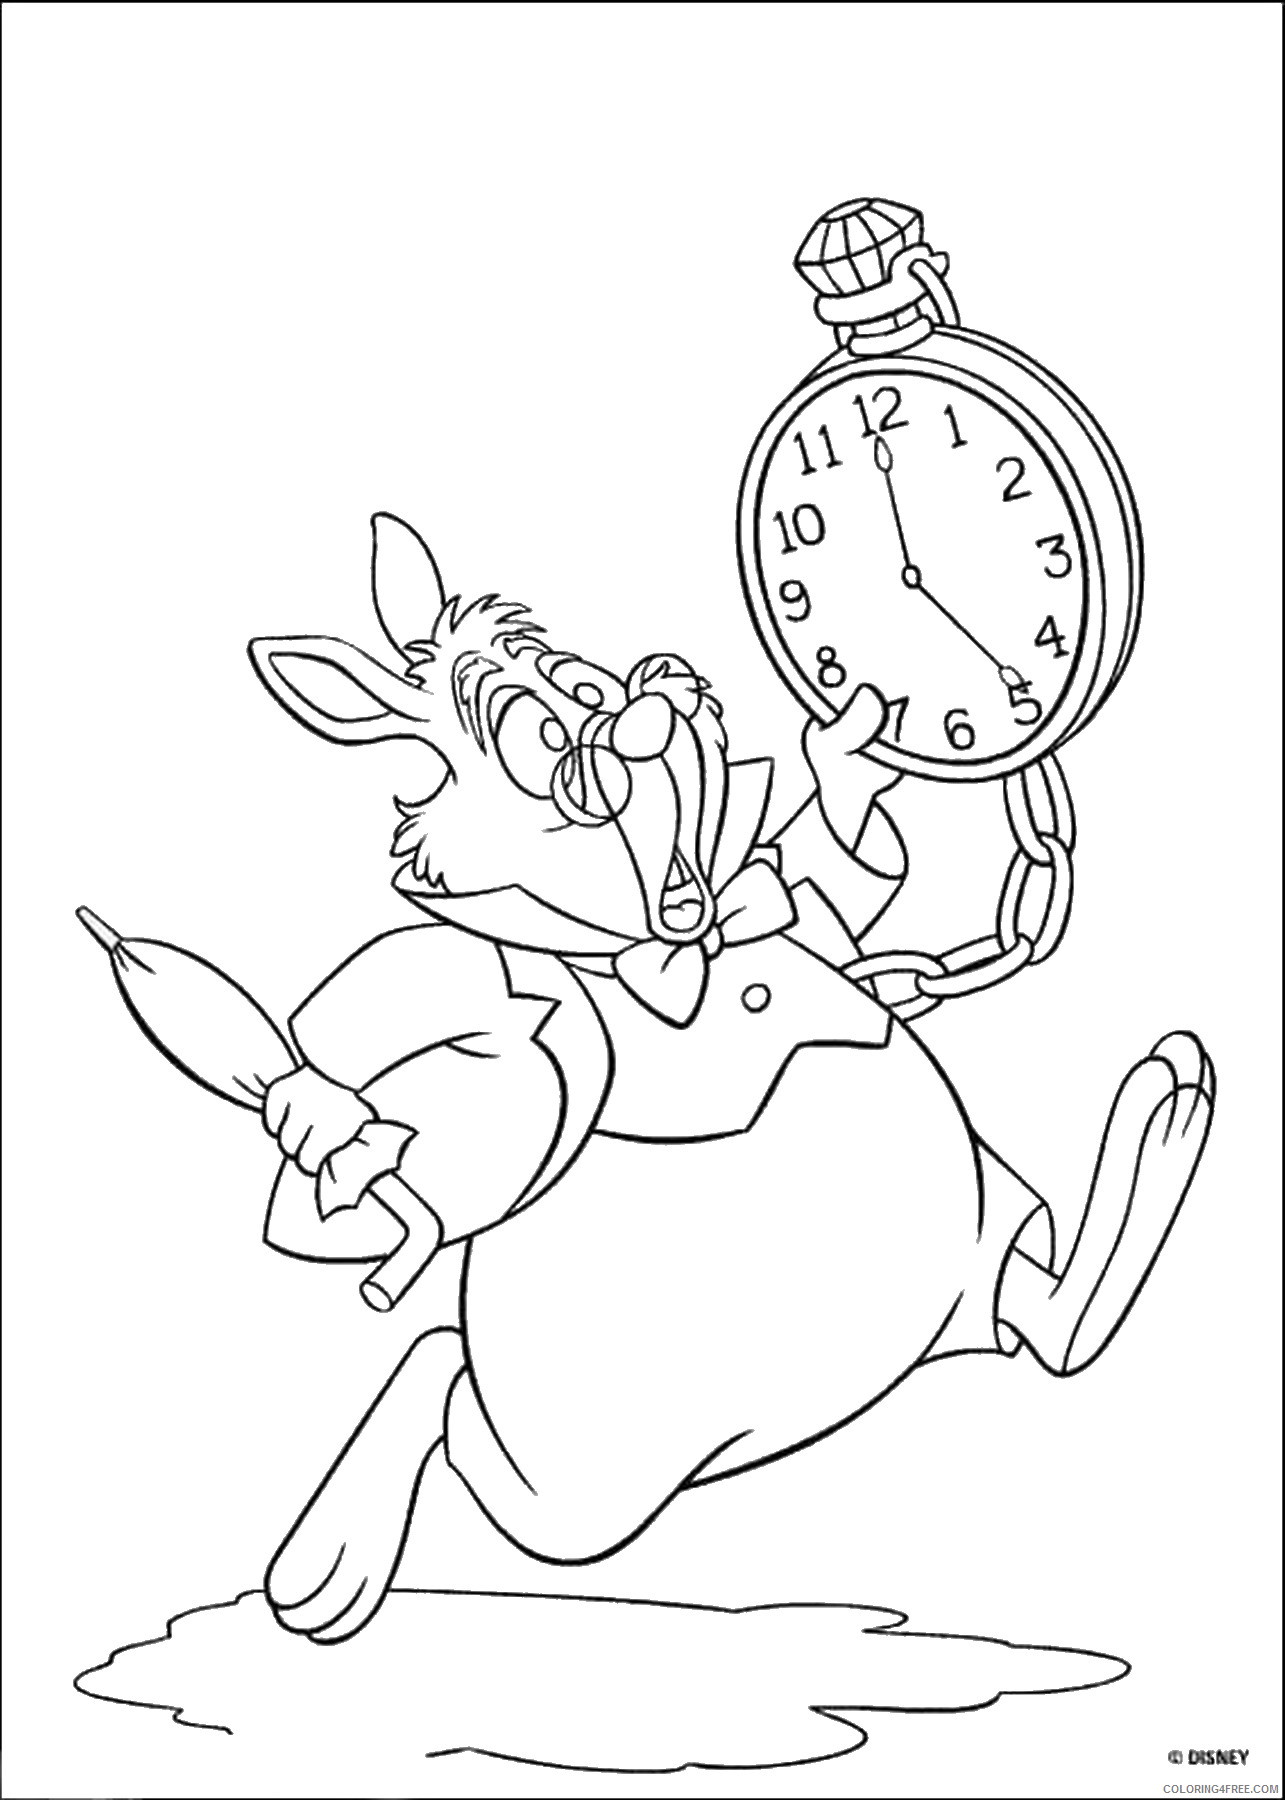 Alice in Wonderland Coloring Pages Cartoons alice_05 Printable 2020 0347 Coloring4free